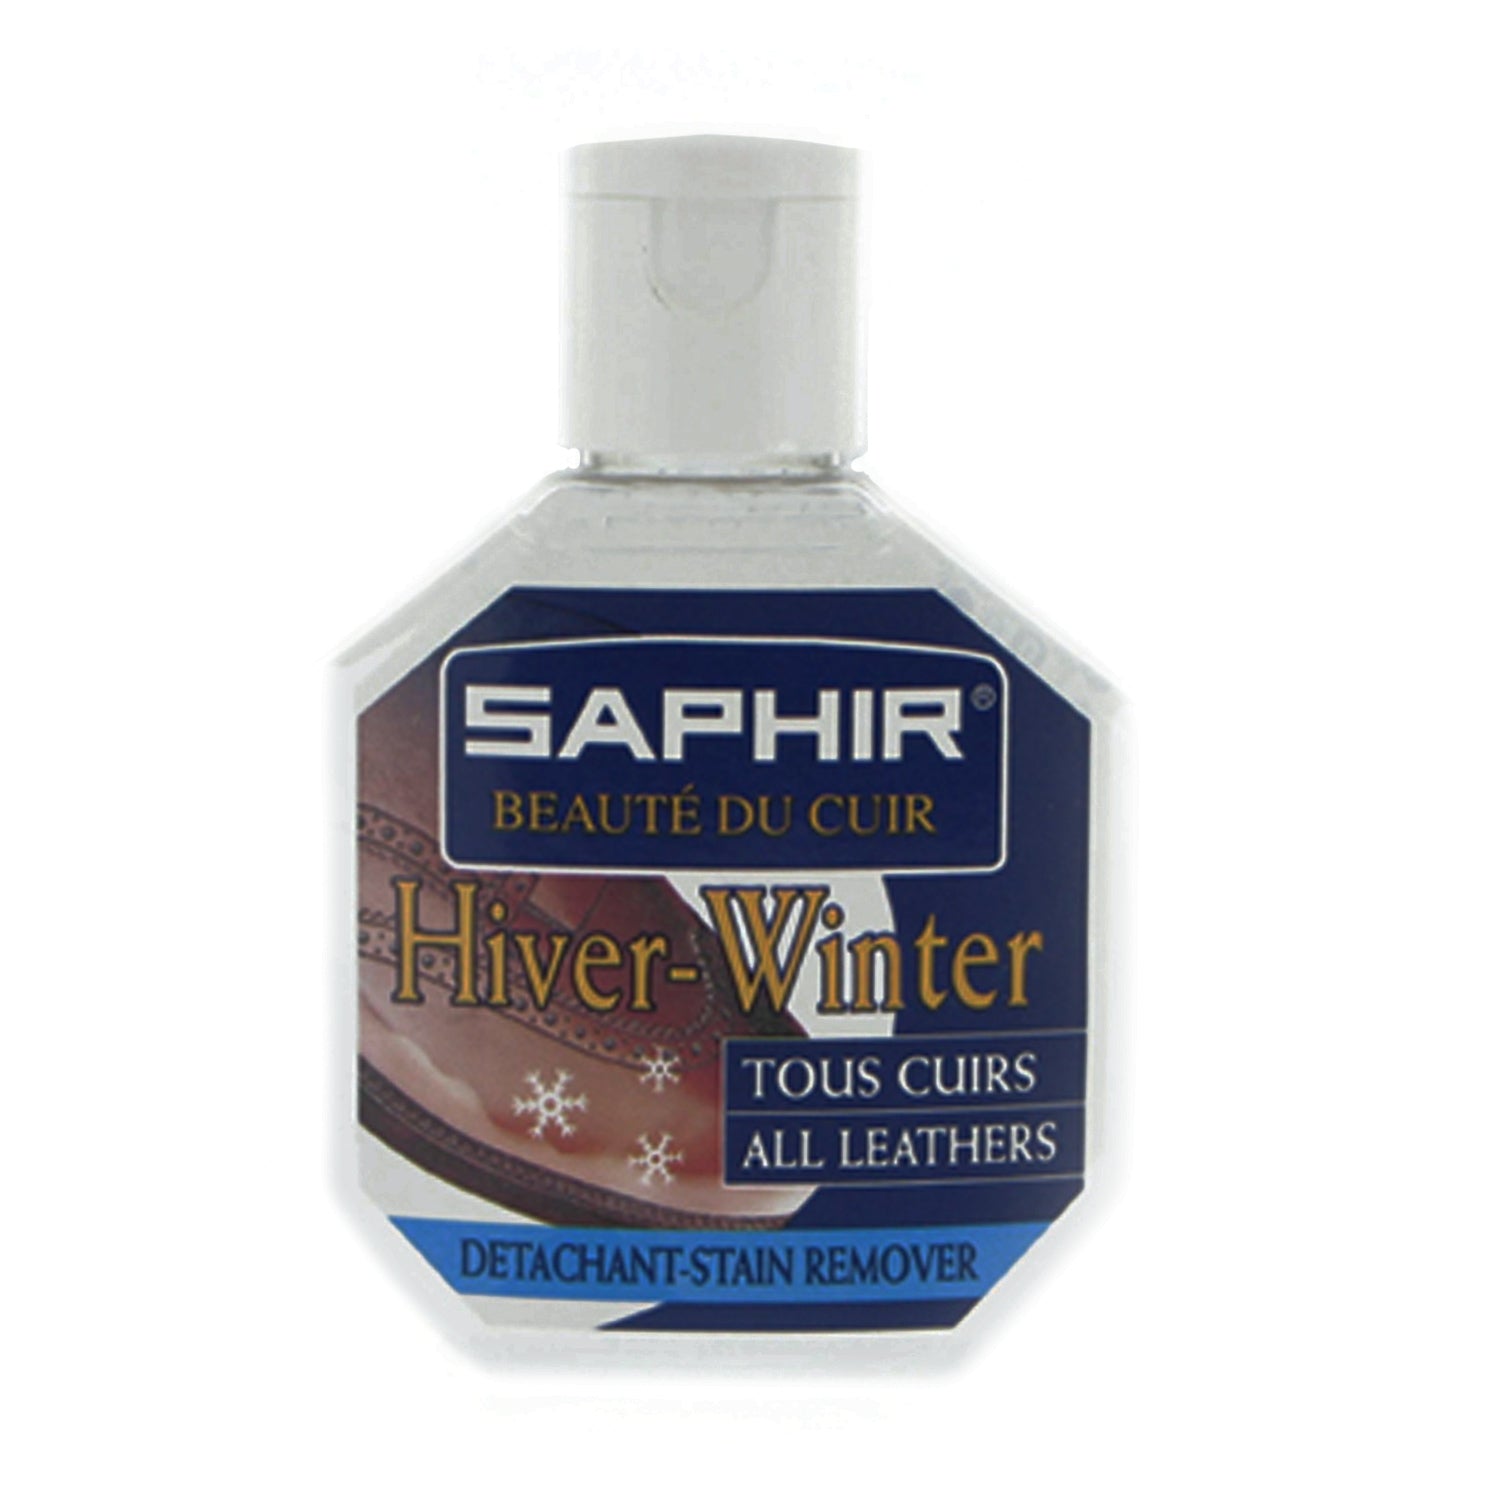 Saphir Hiver-Winter Salt and Snow Stain Remover